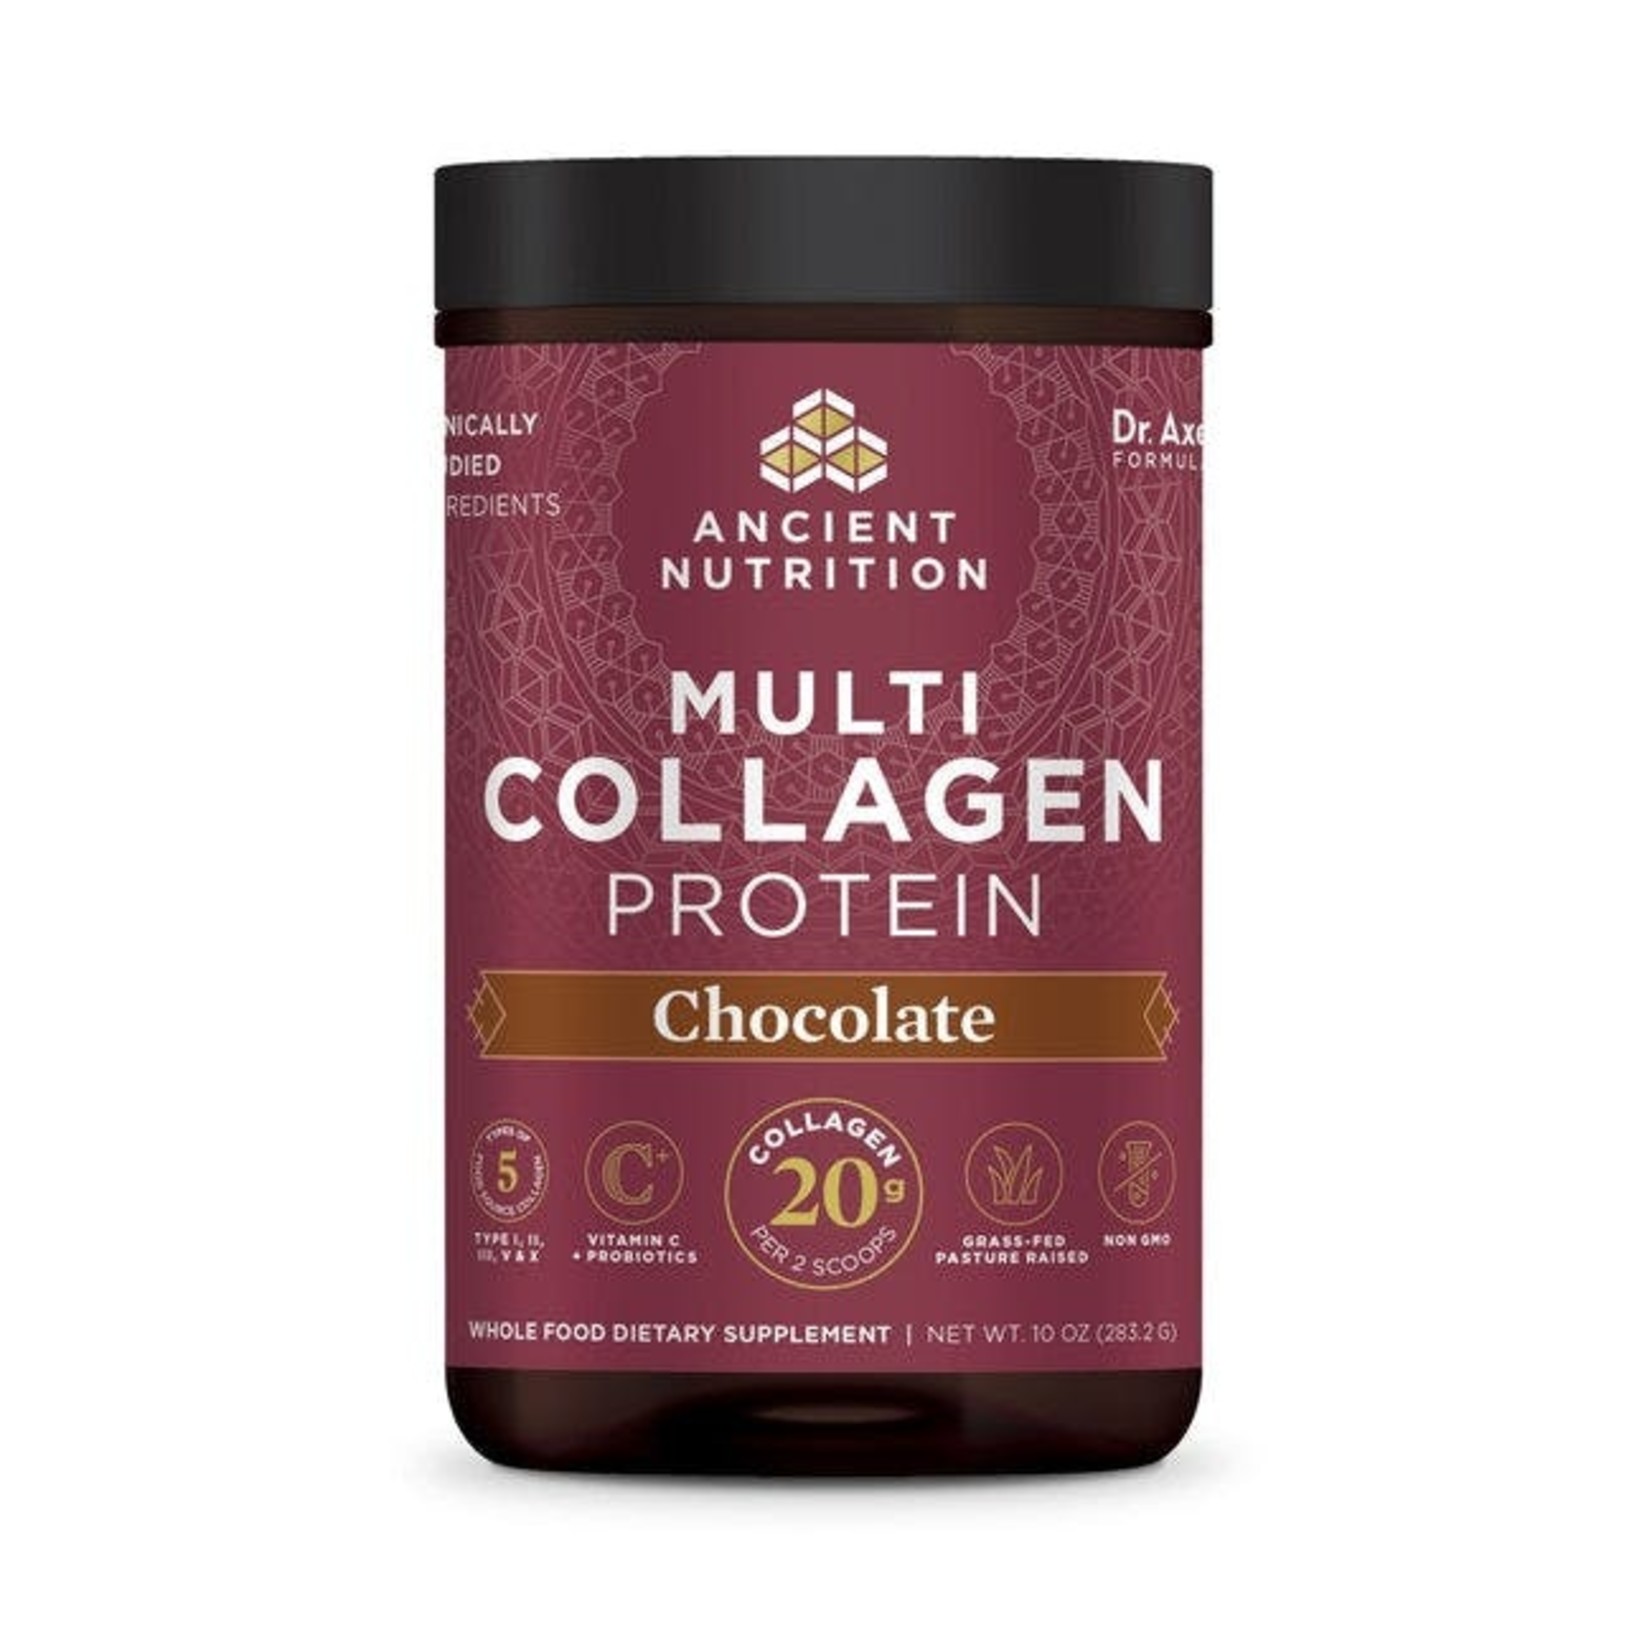 Ancient Nutrition Ancient Nutrition - Multi Collagen Protein Chocolate - 10 oz